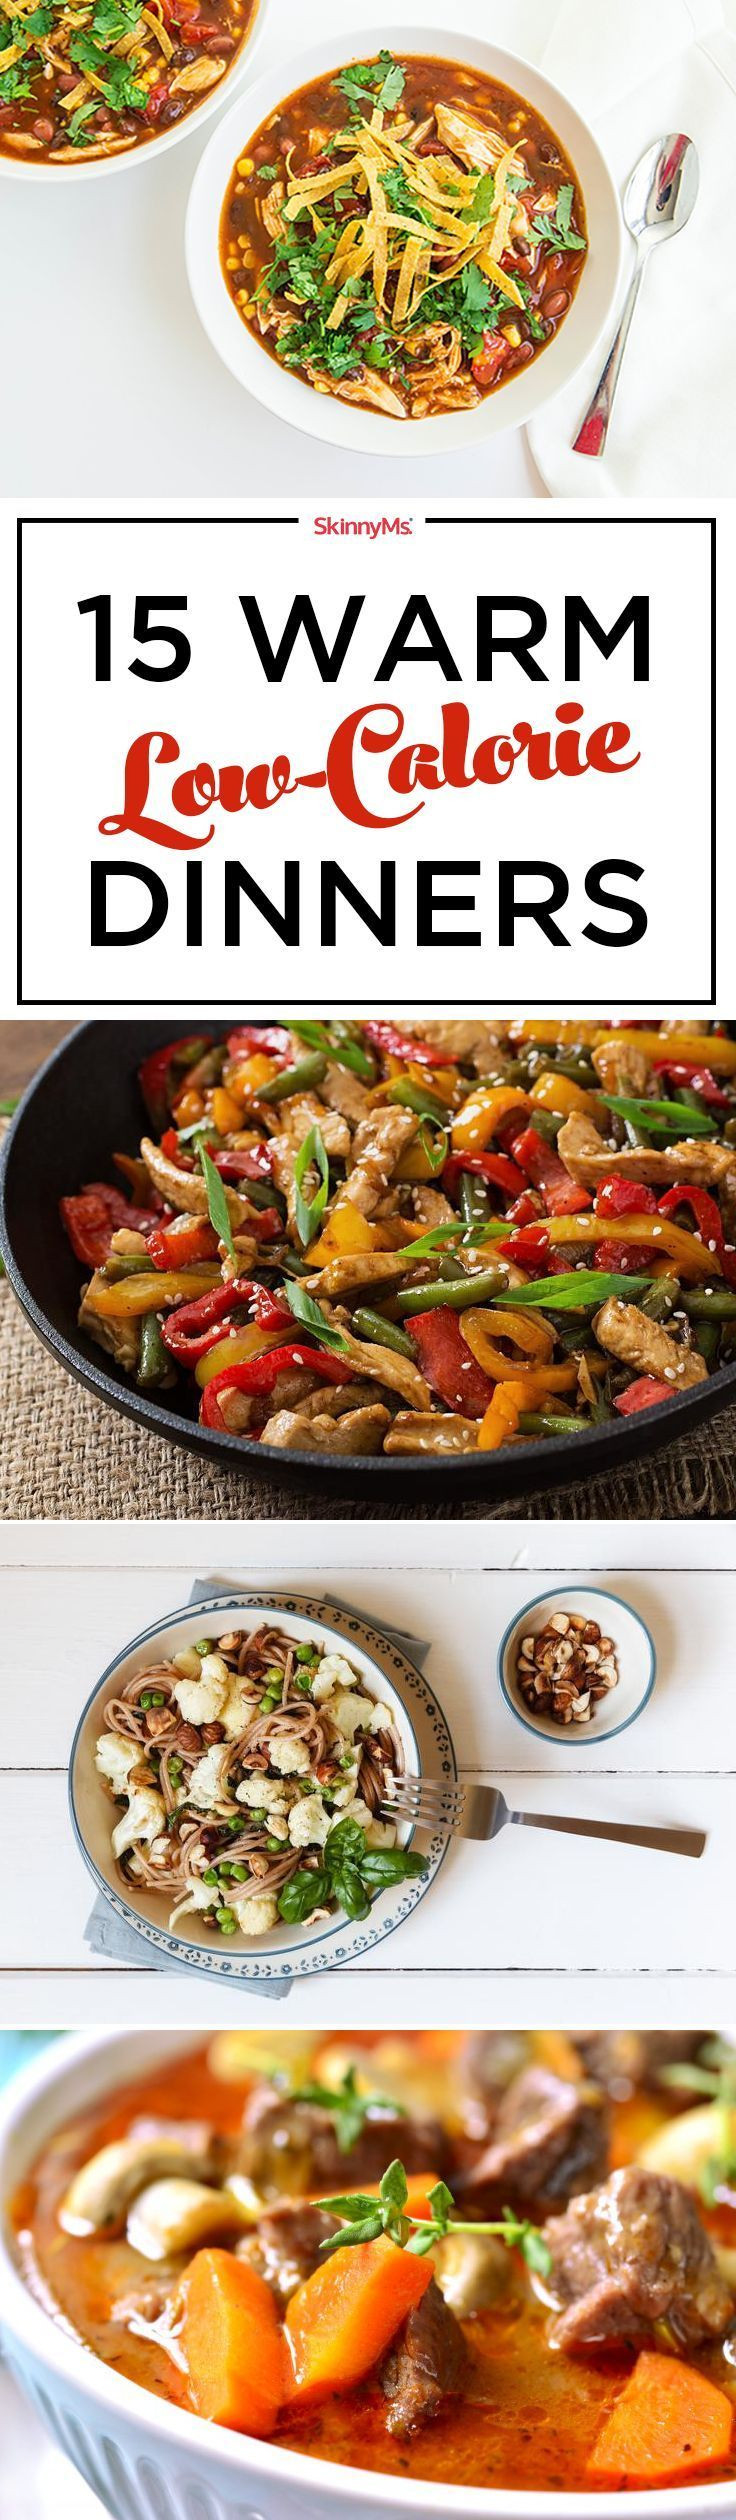 Good Low Calorie Dinners
 1240 best images about Low Calorie Options on Pinterest